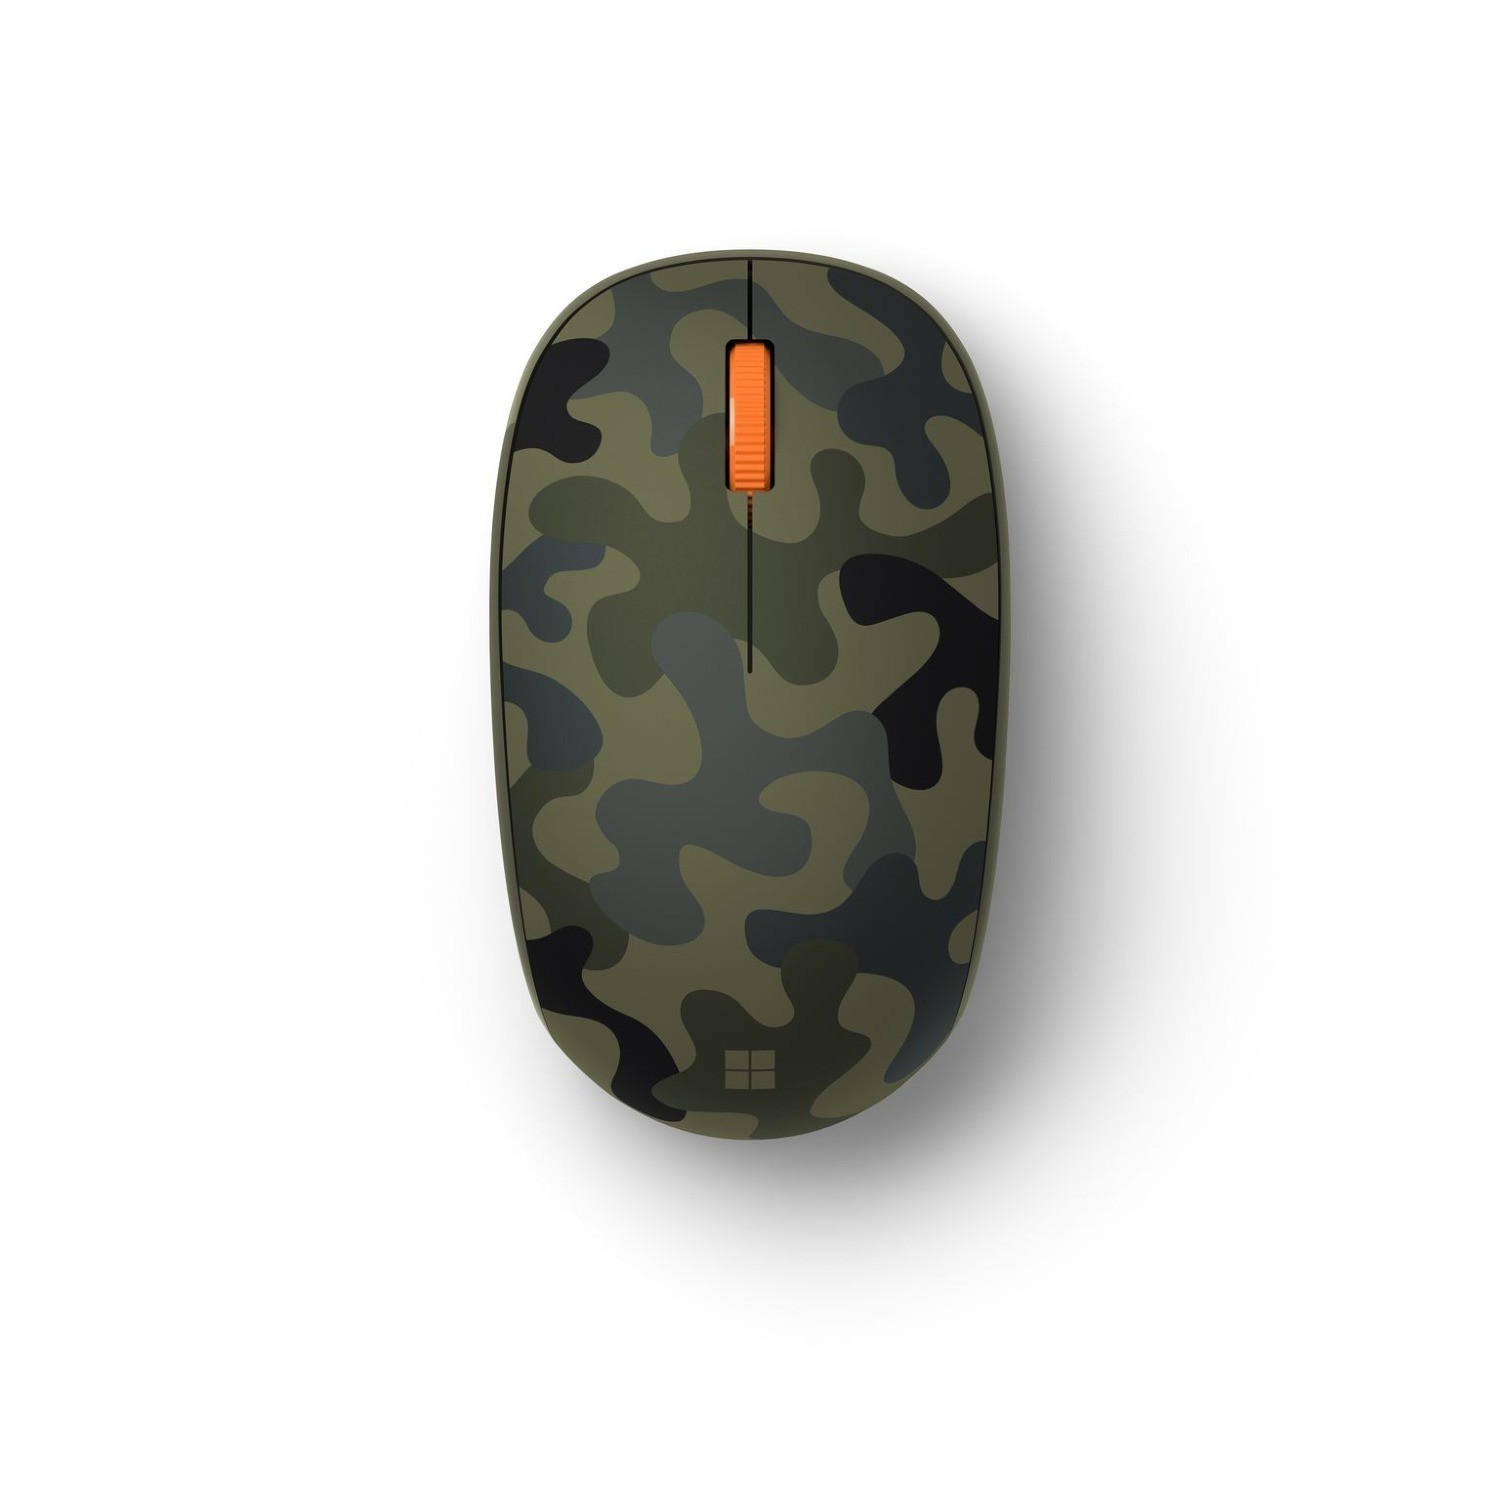 Microsoft Wireless Mice: Bluetooth Forest Camo Mouse $10, USB 1850 Flame Red Mouse $7, USB 3500 Pink Mouse $9 + Free Shipping